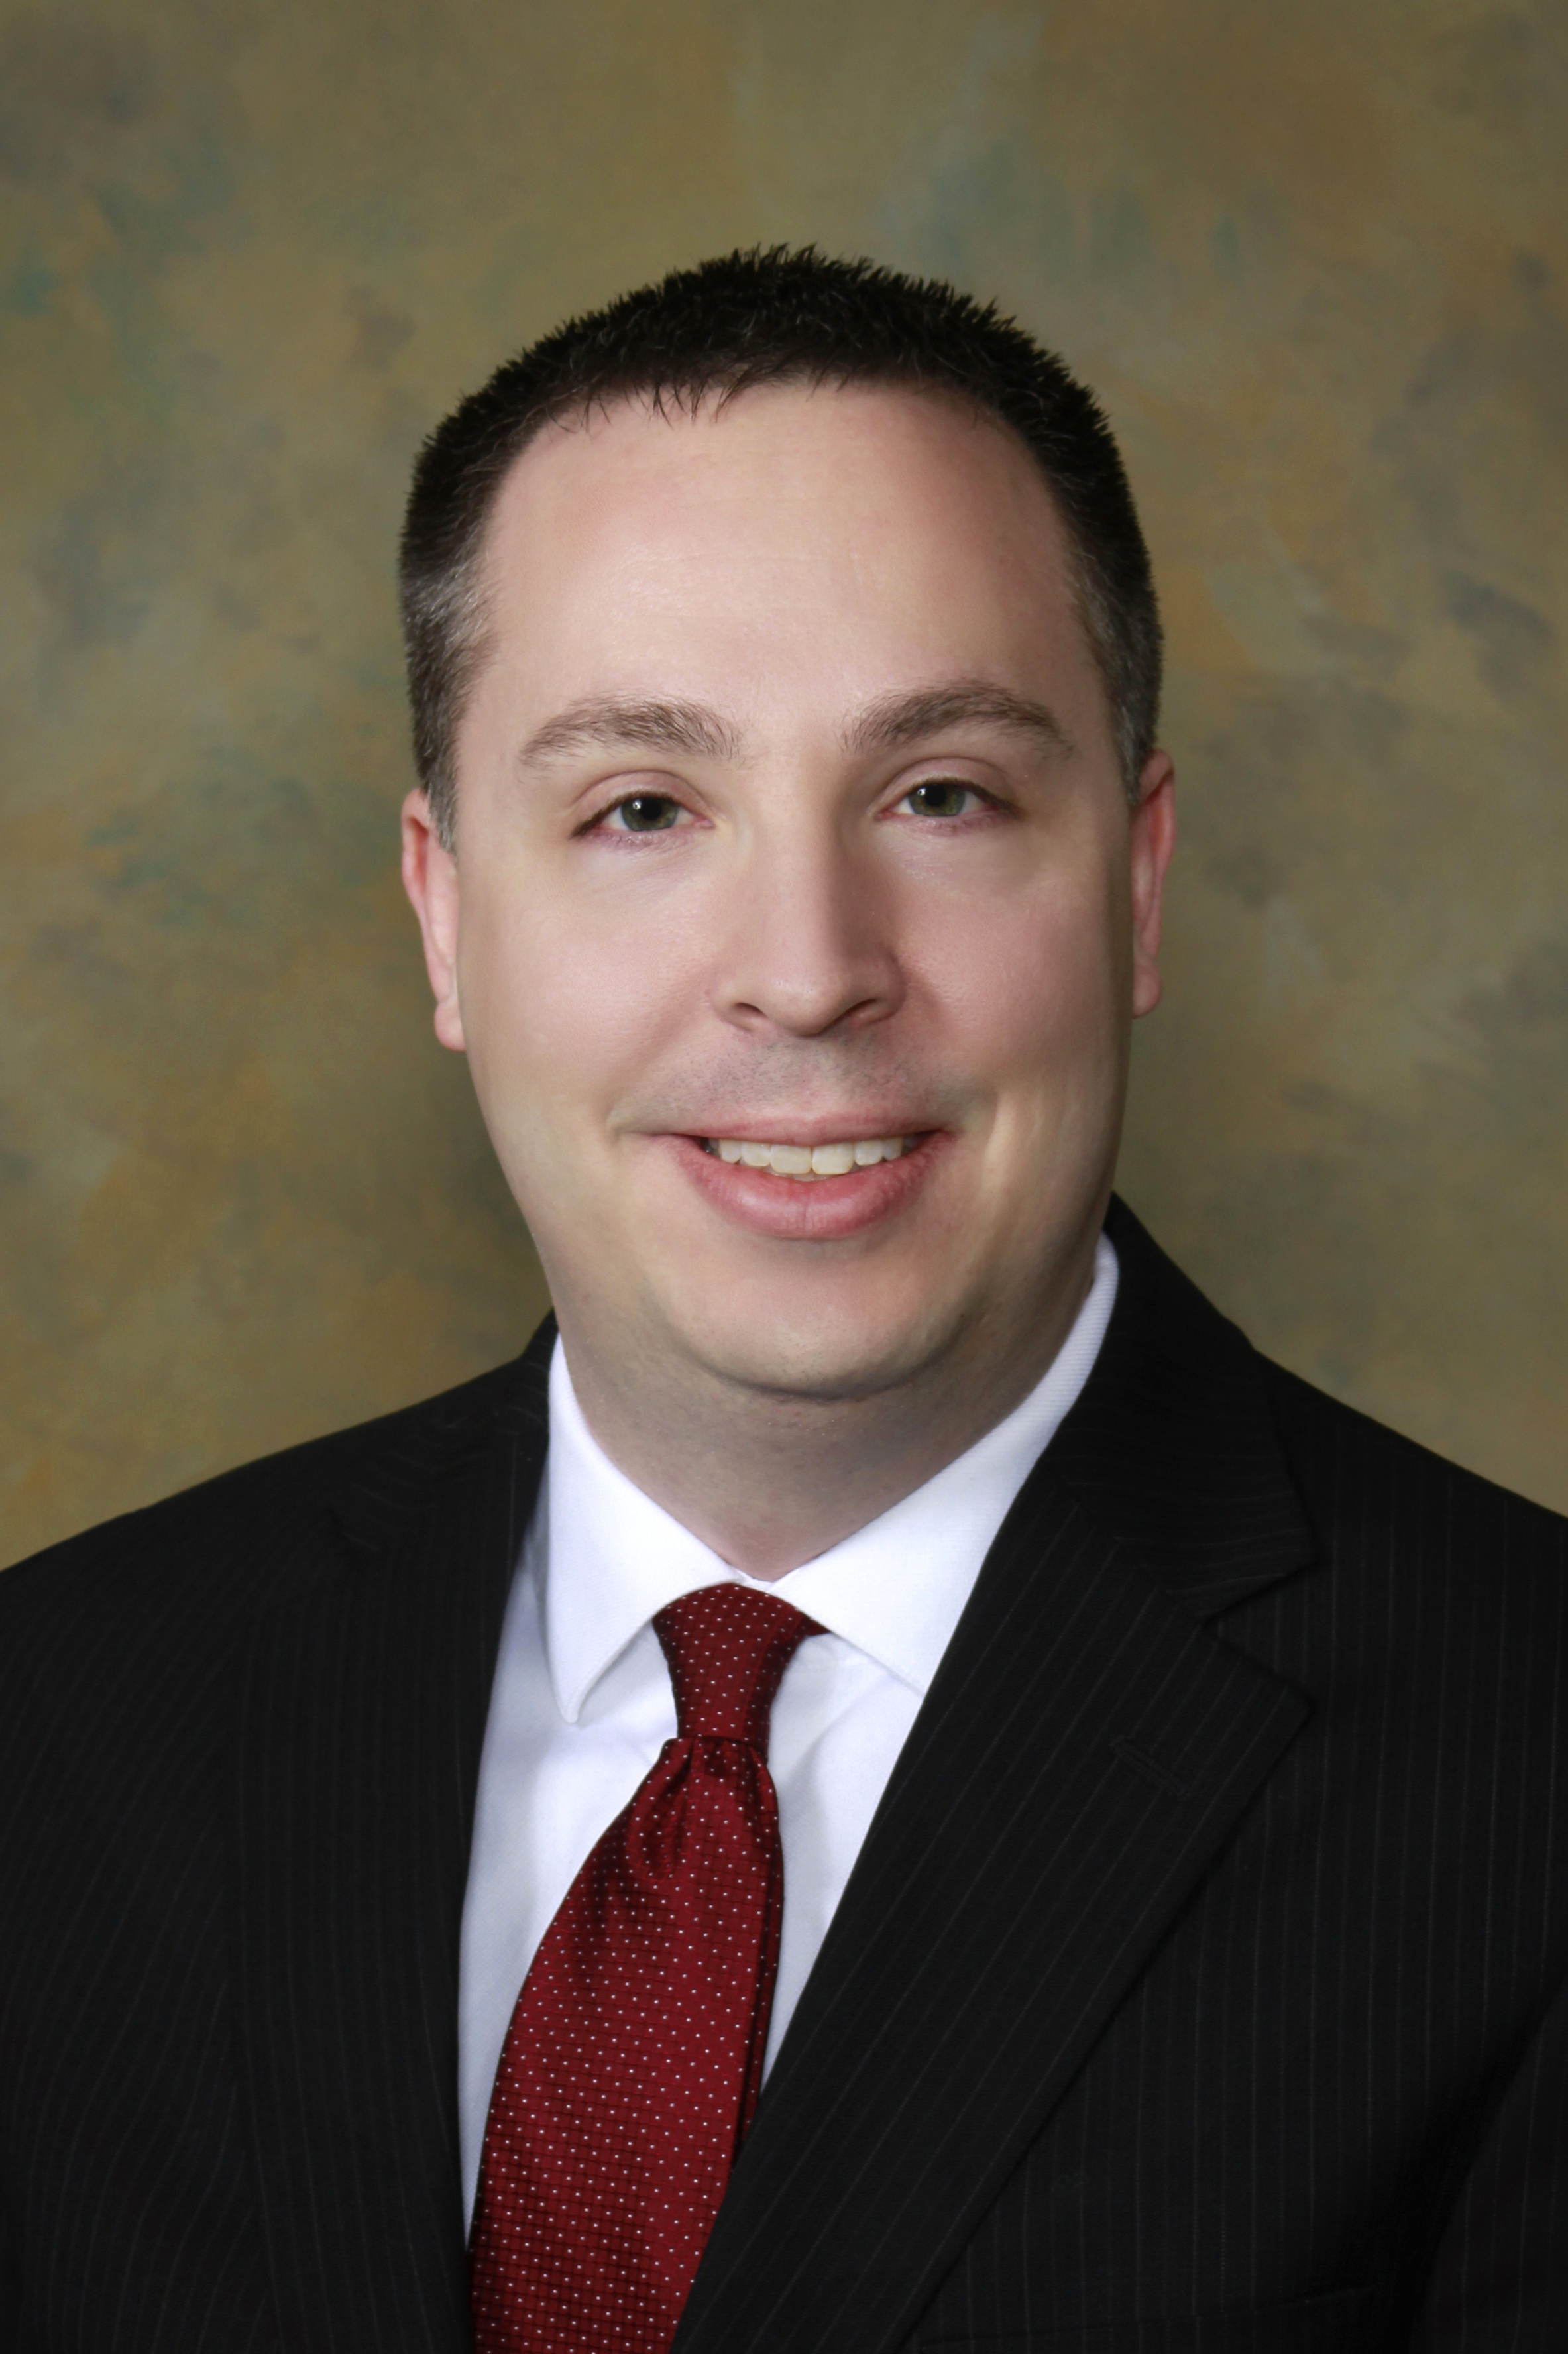 DUI Attorney Andrew Hoverman - Baltimore City , MD - DUIAttorney.com